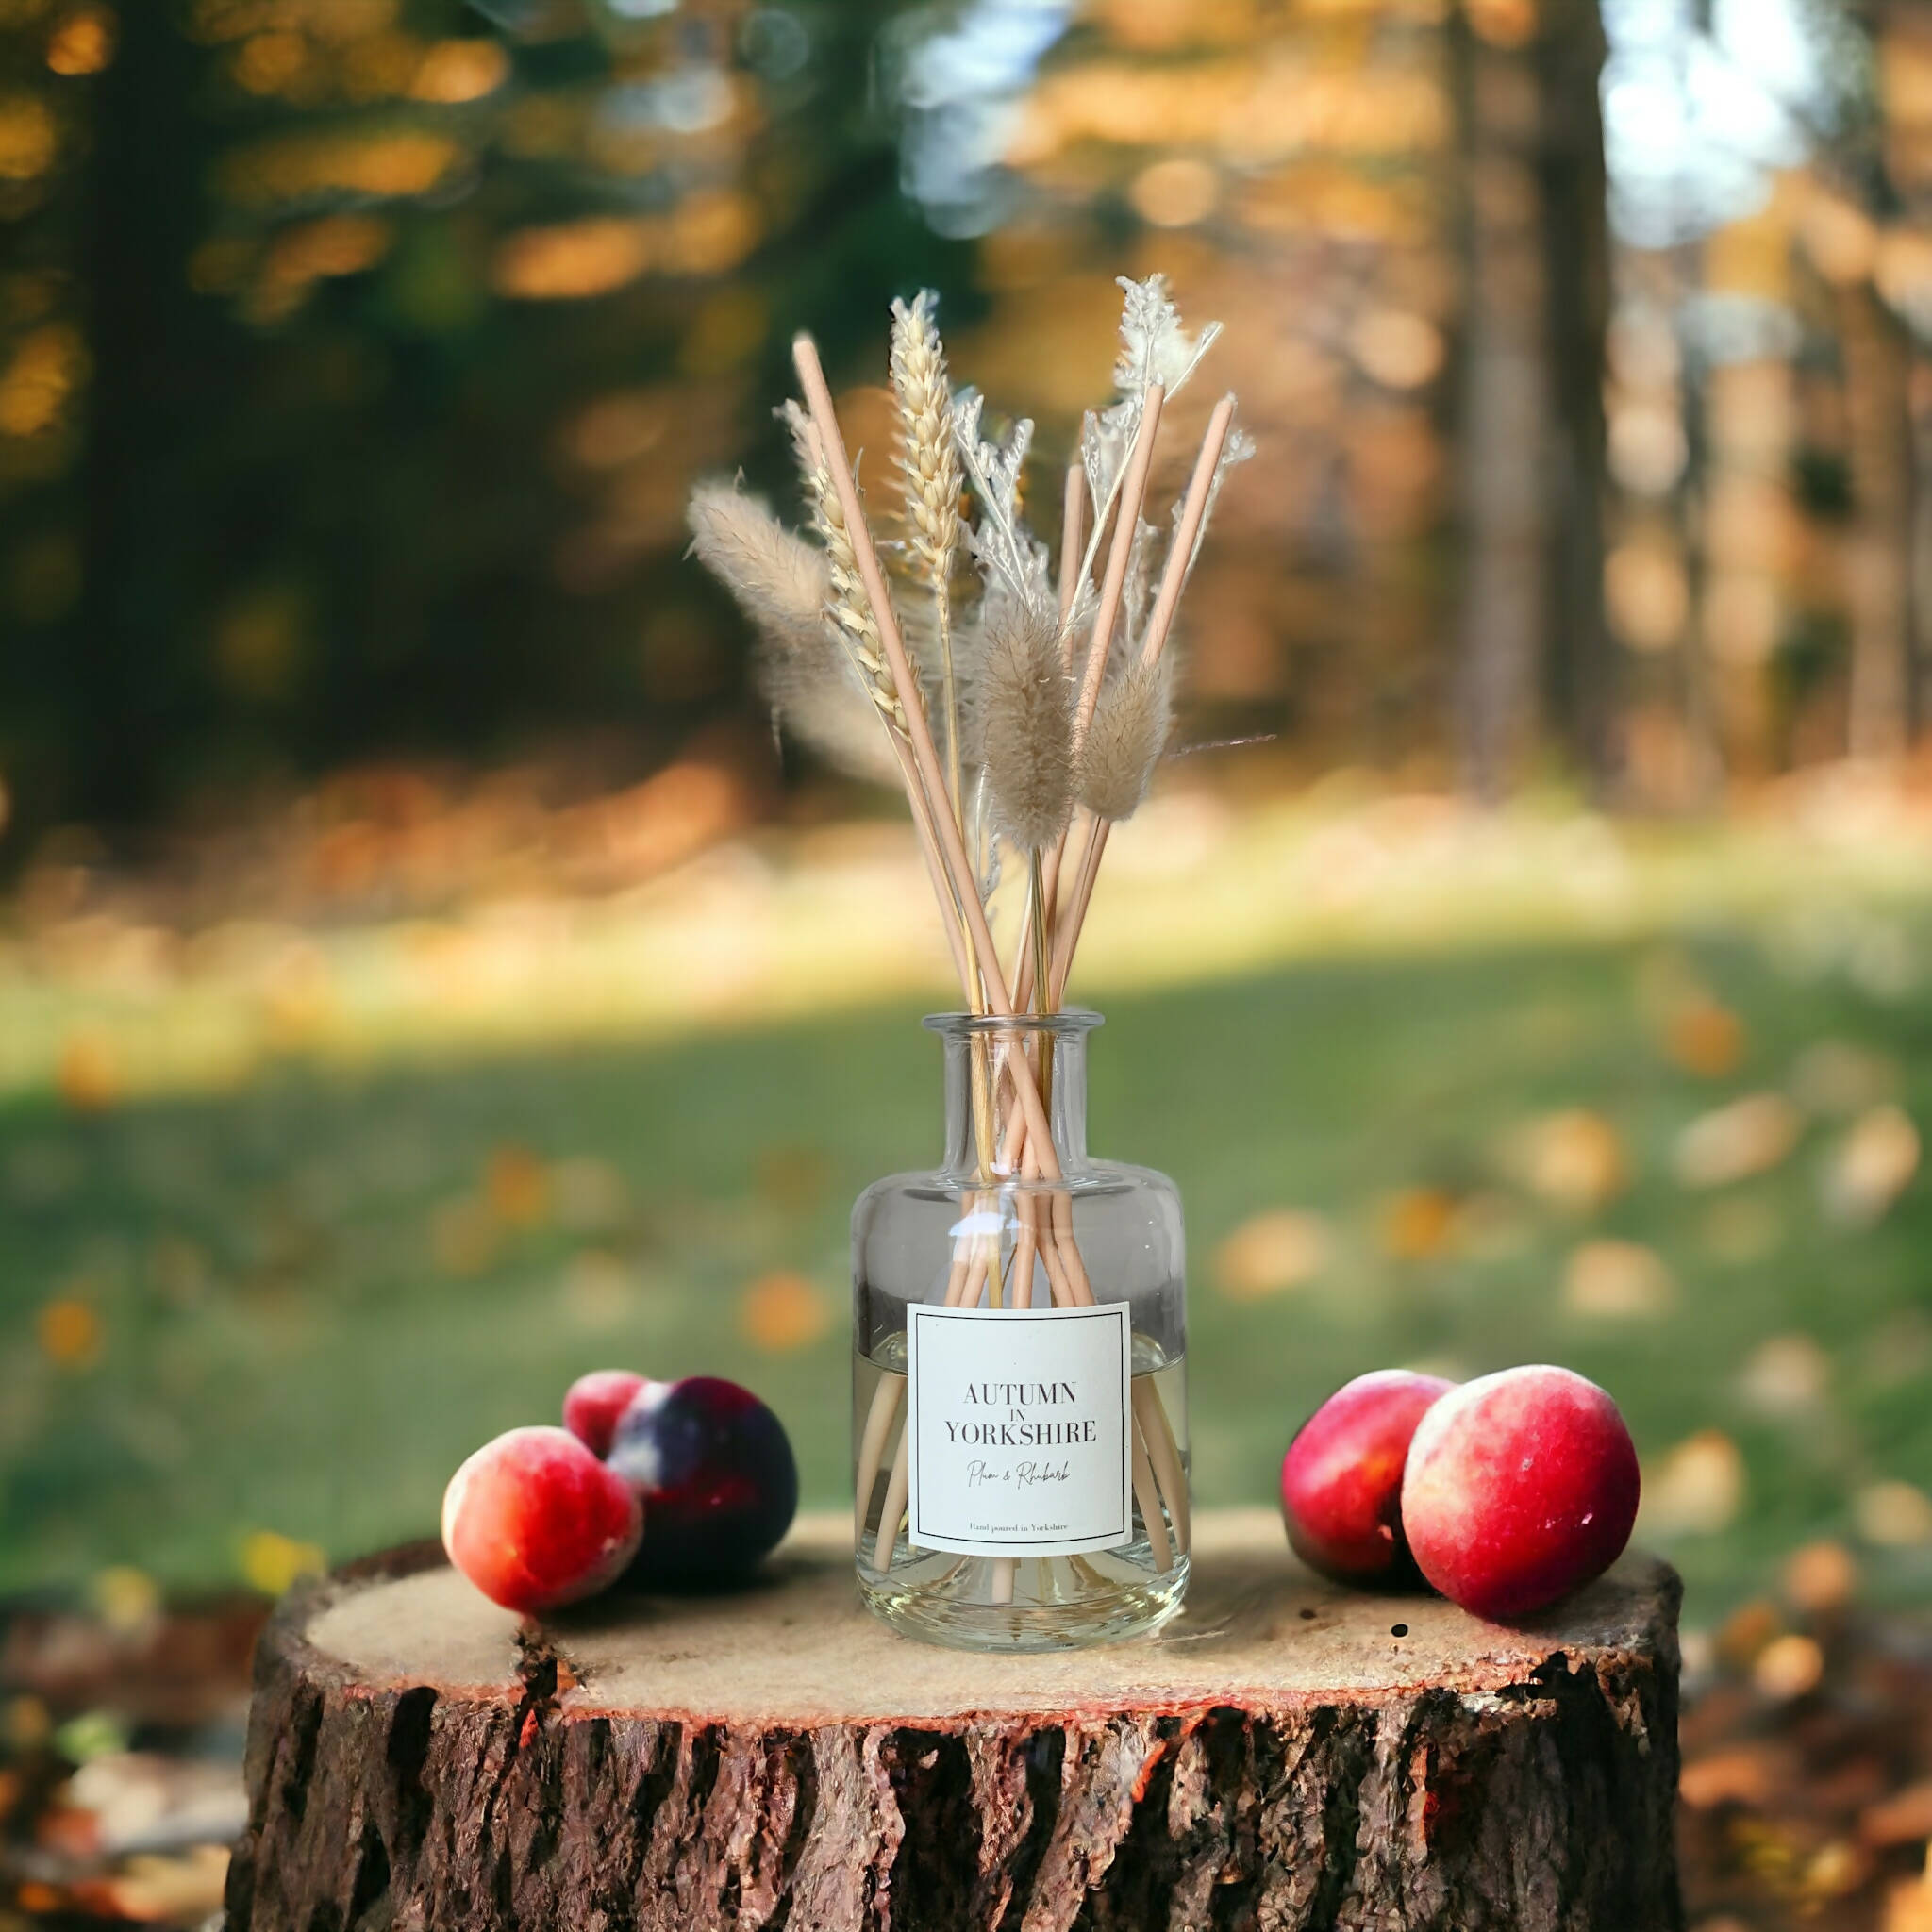 Autumn in Yorkshire - Plum and Rhubarb Dried Flower Reed Diffuser - 100ml